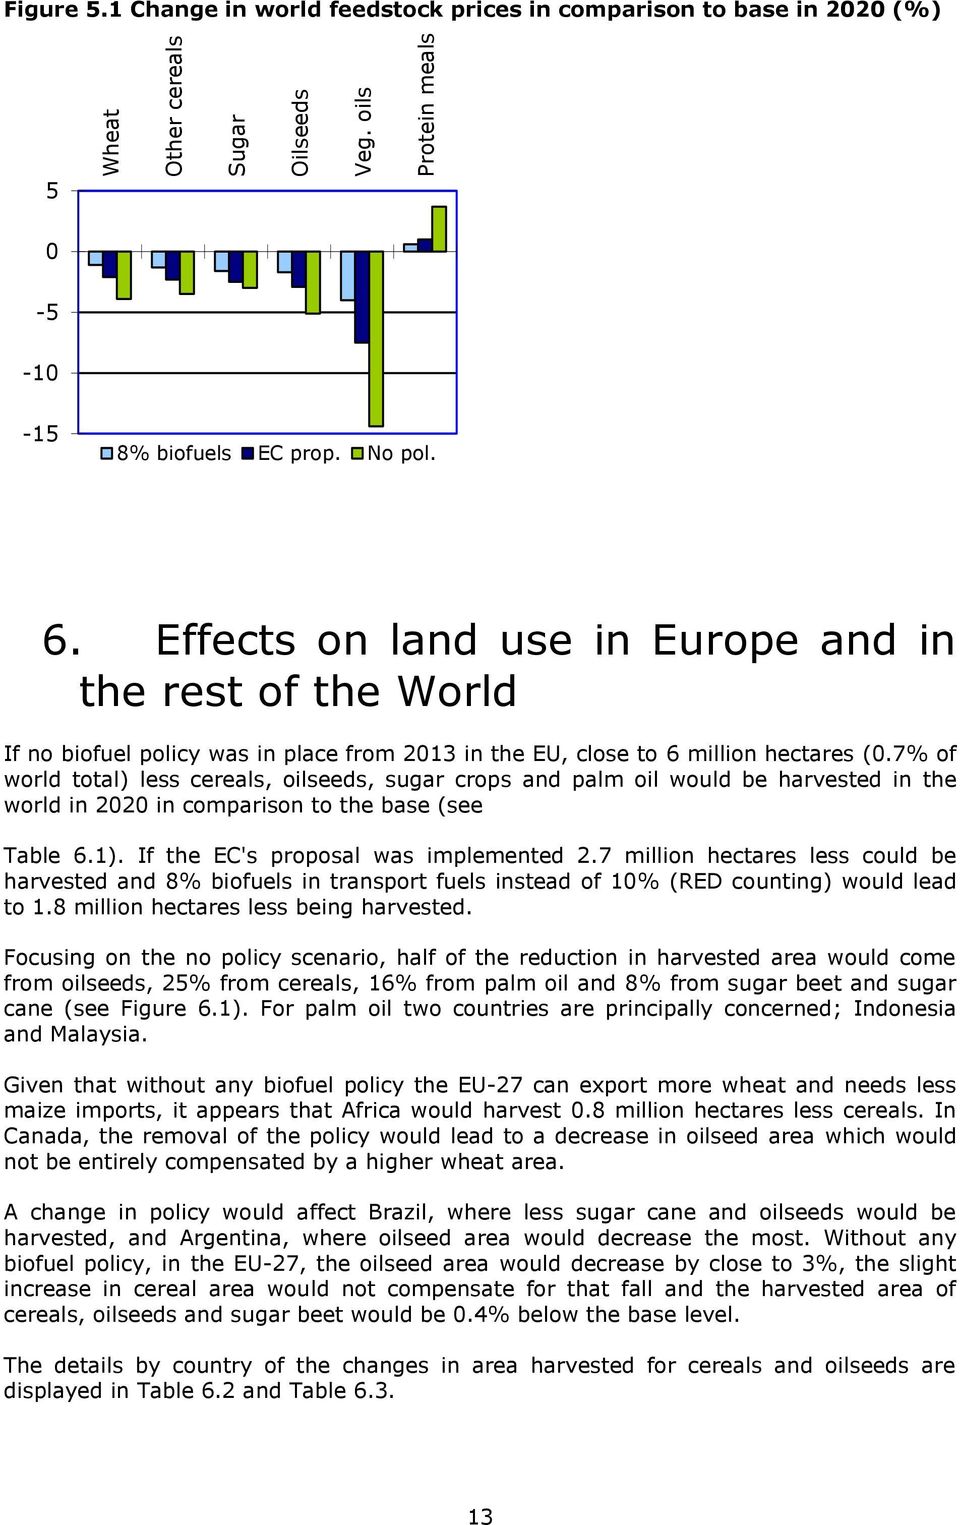 7% of world total) less cereals, oilseeds, sugar crops and palm oil would be harvested in the world in 2020 in comparison to the base (see Table 6.1). If the EC's proposal was implemented 2.